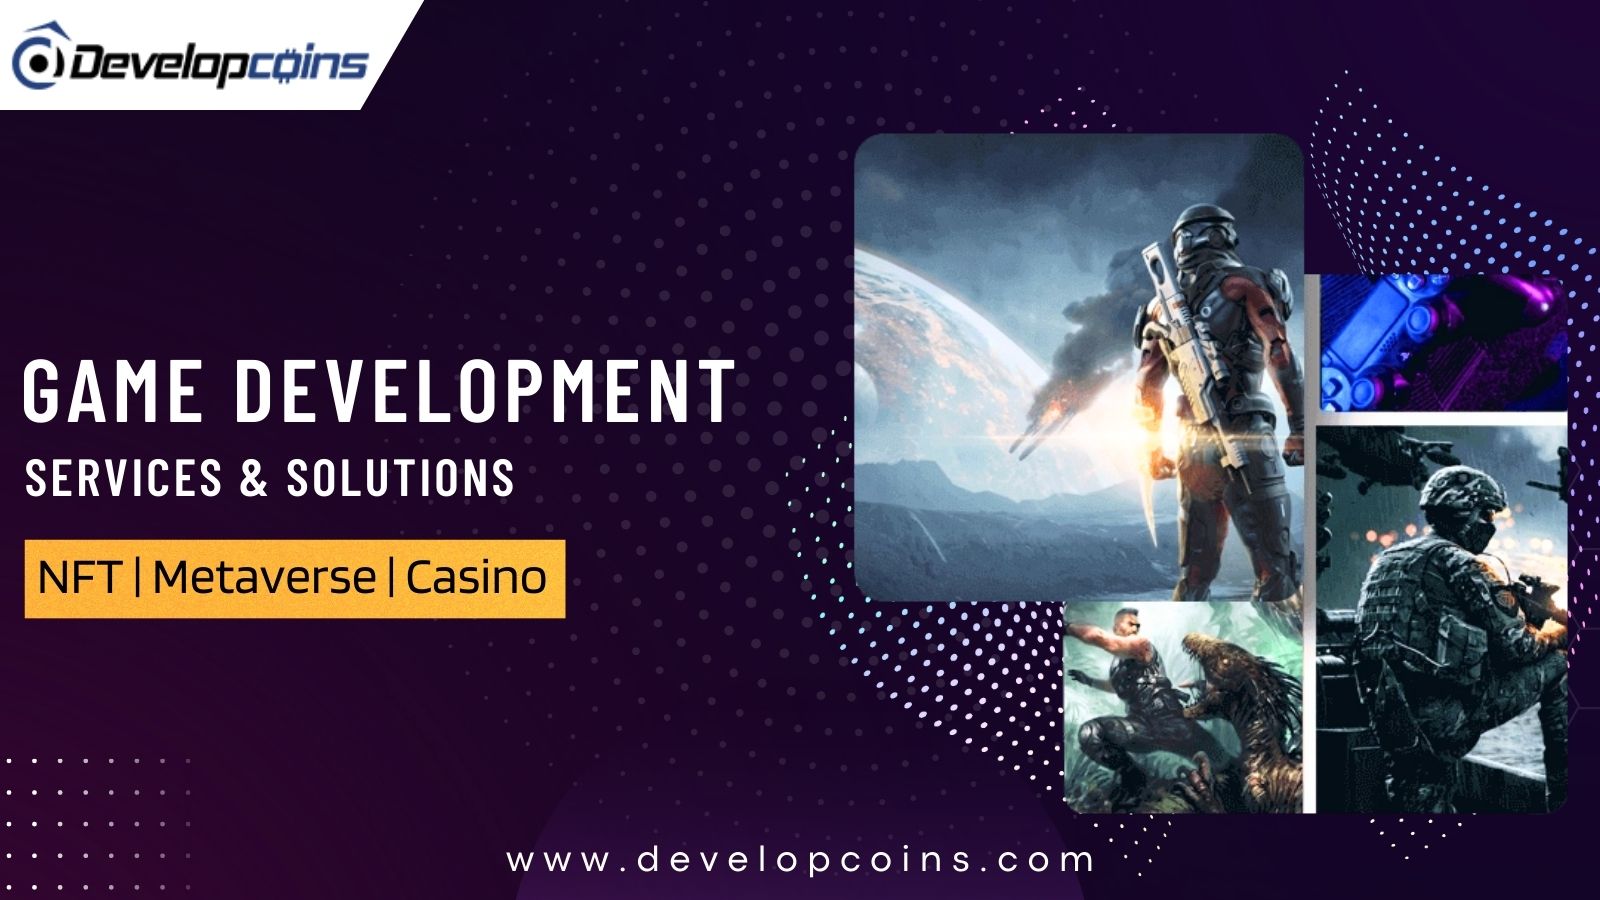 Unleash The True Potential Of Gaming: Partner With The Top-Rated Game Development Company